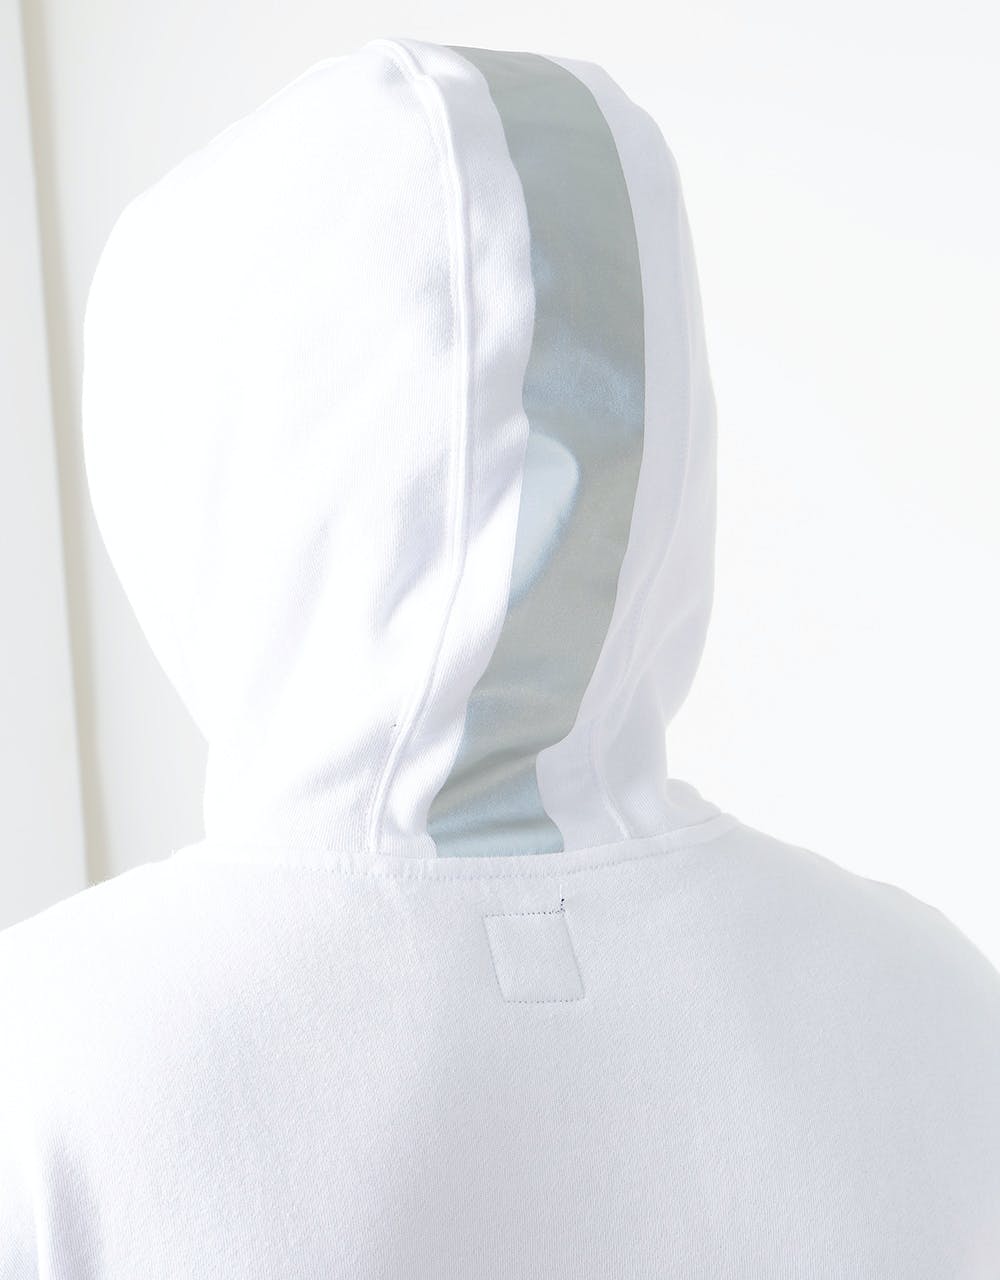 Vans Reflective Pullover Hoodie - White